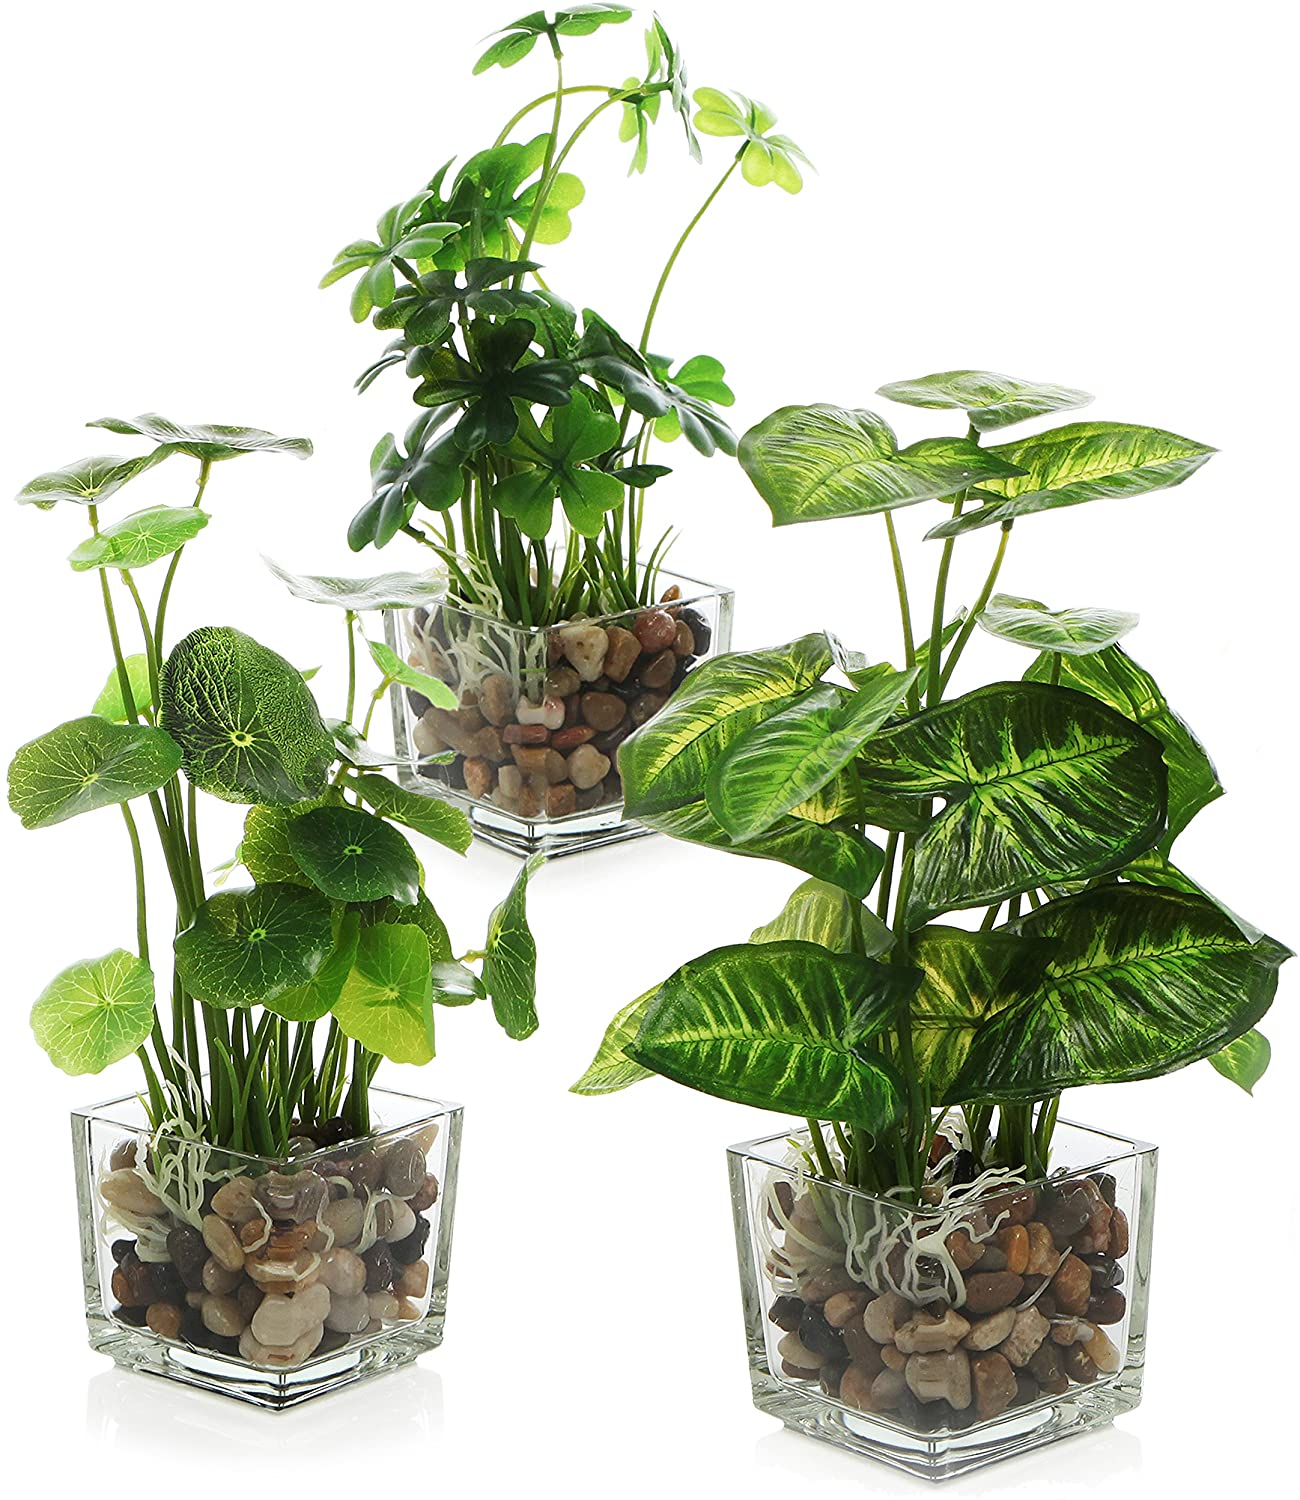 MyGift Mini Glass Potted Artificial Plants, 3-Pack